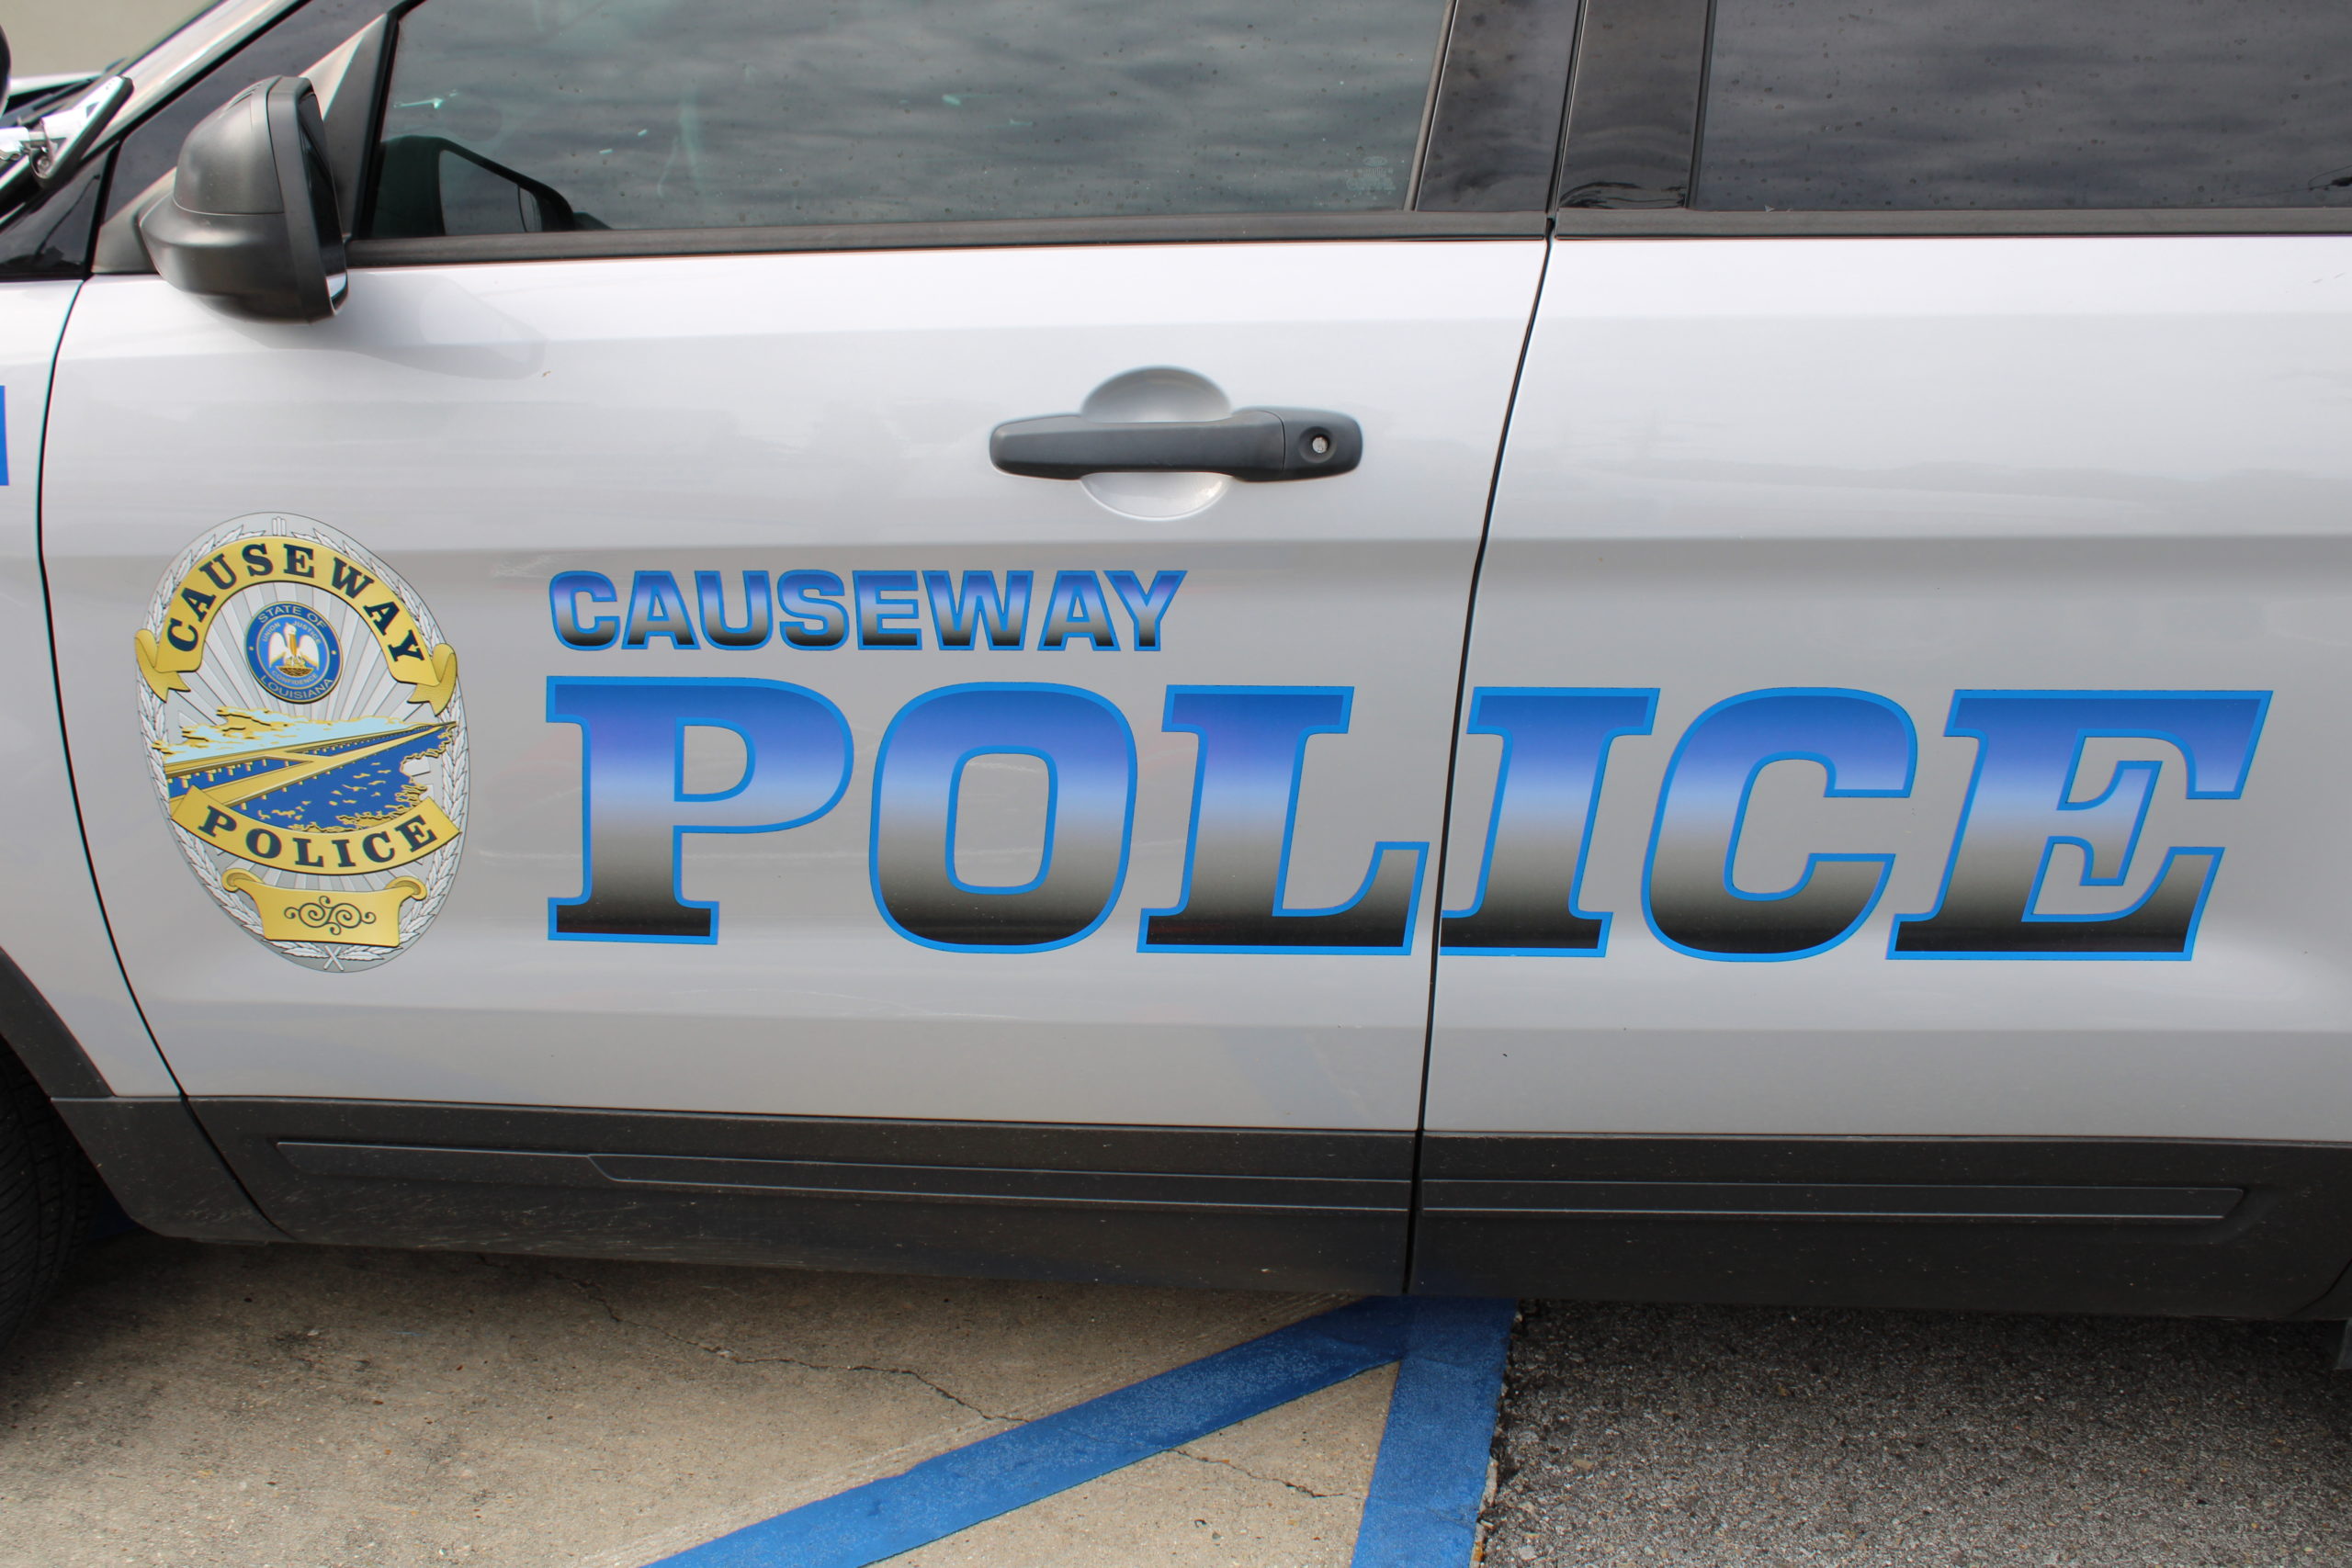 About Police - The U.S. Causeway